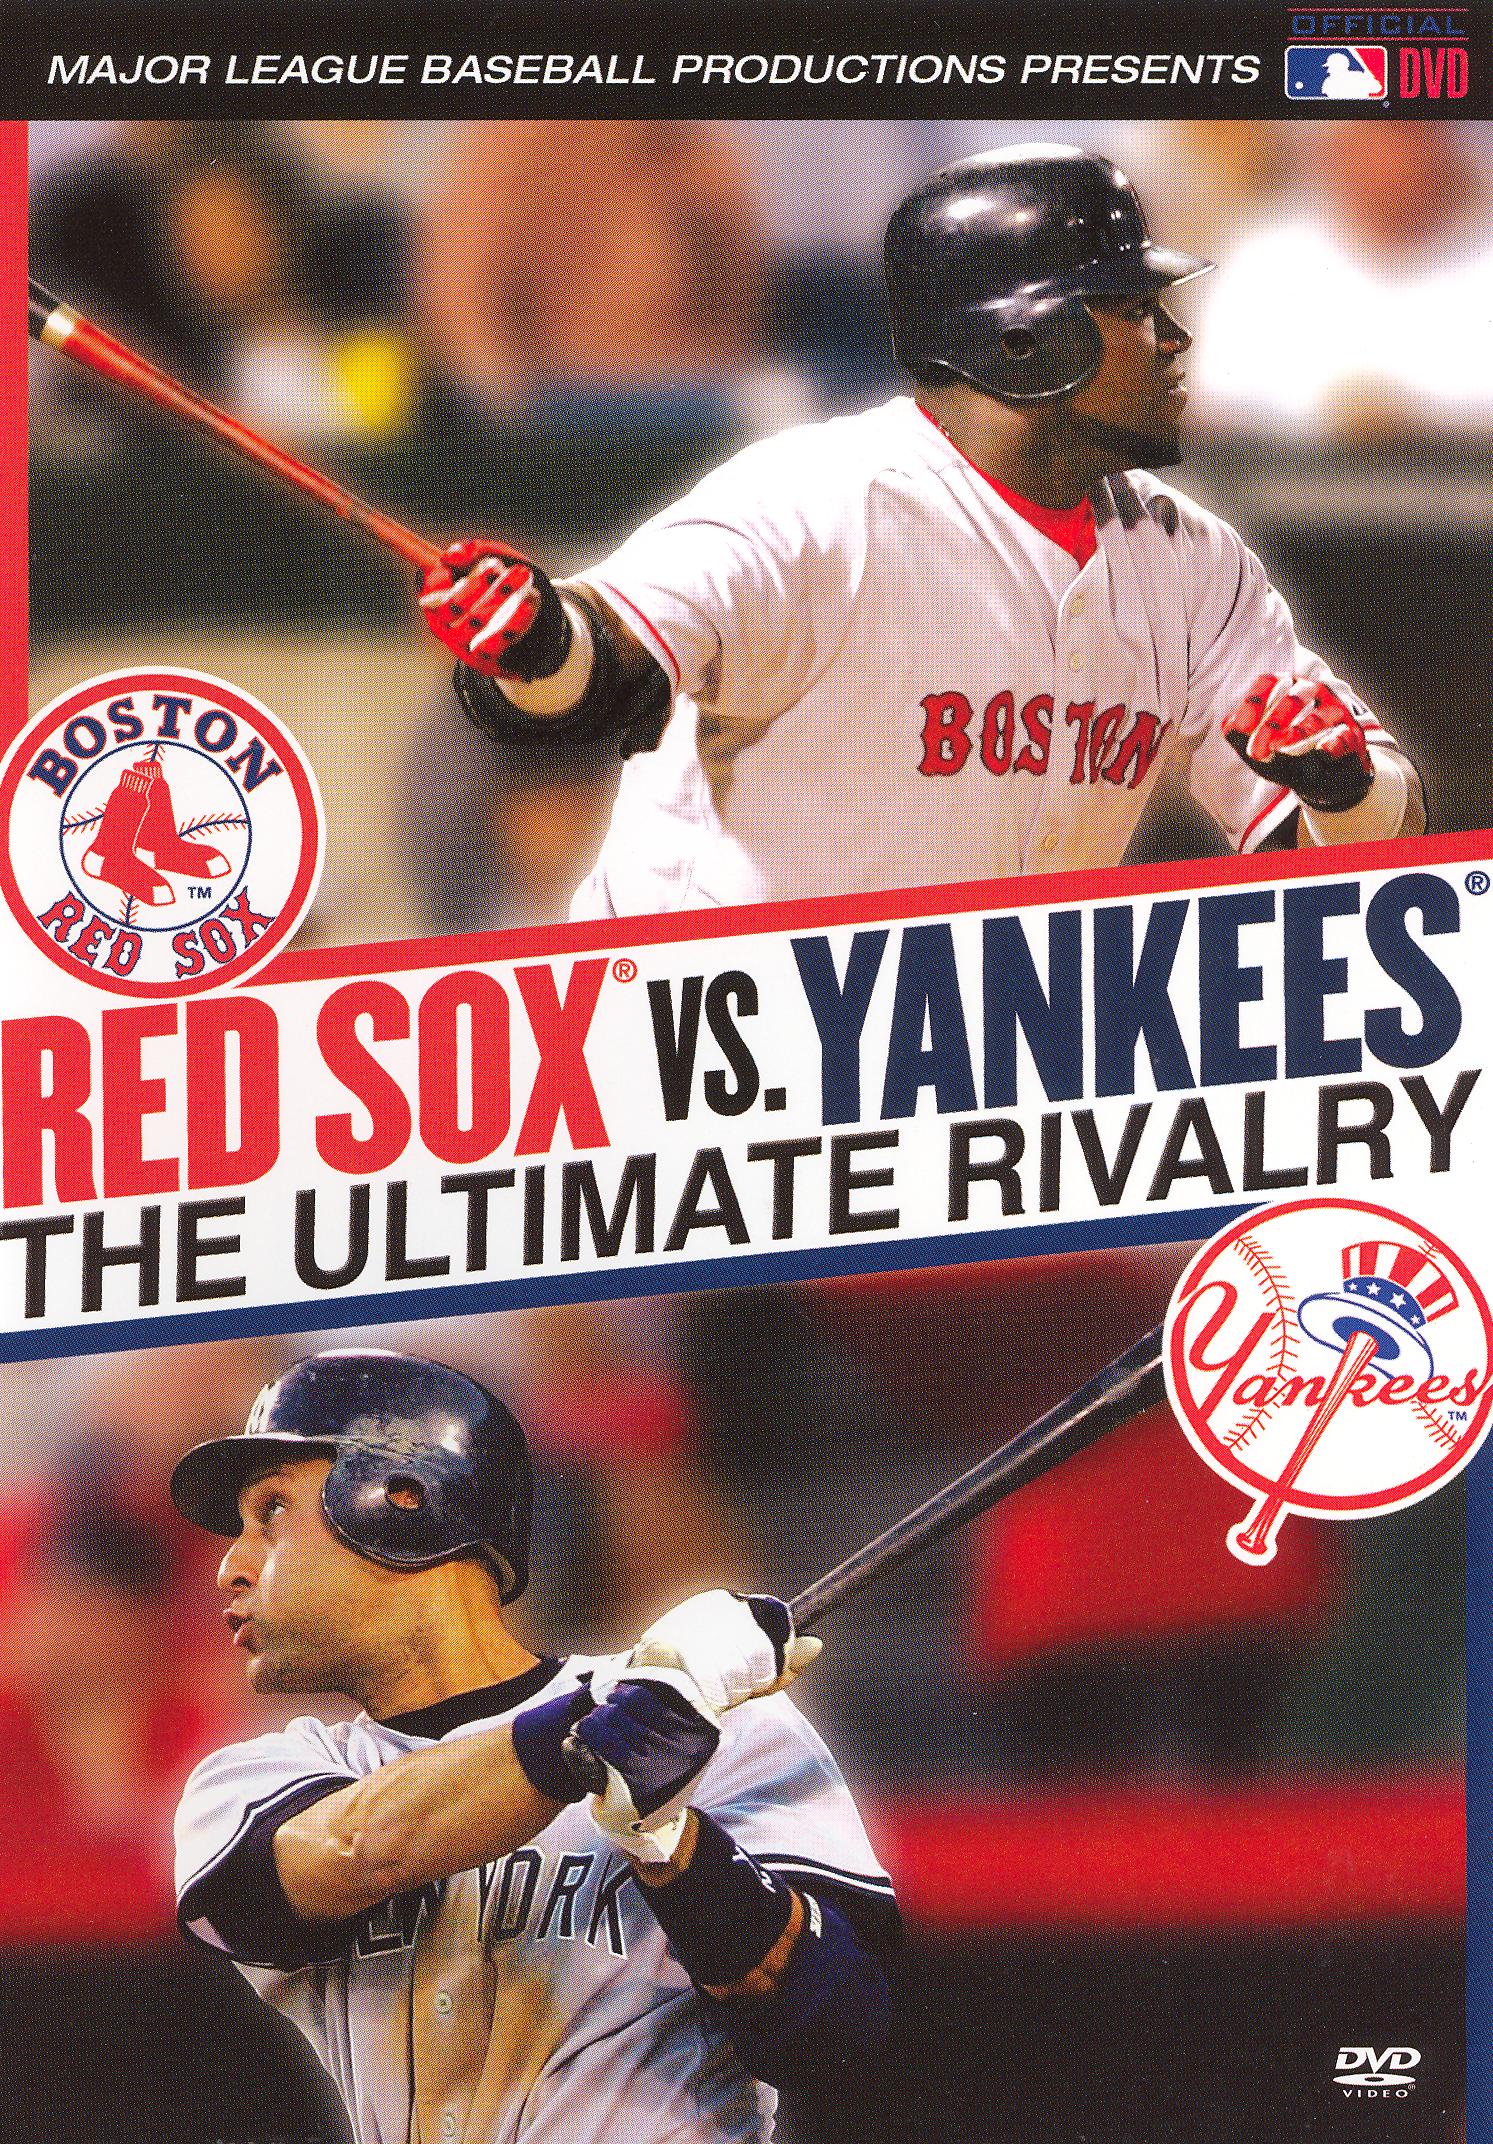 Red Sox vs. Yankees The Ultimate Rivalry Synopsis, Characteristics